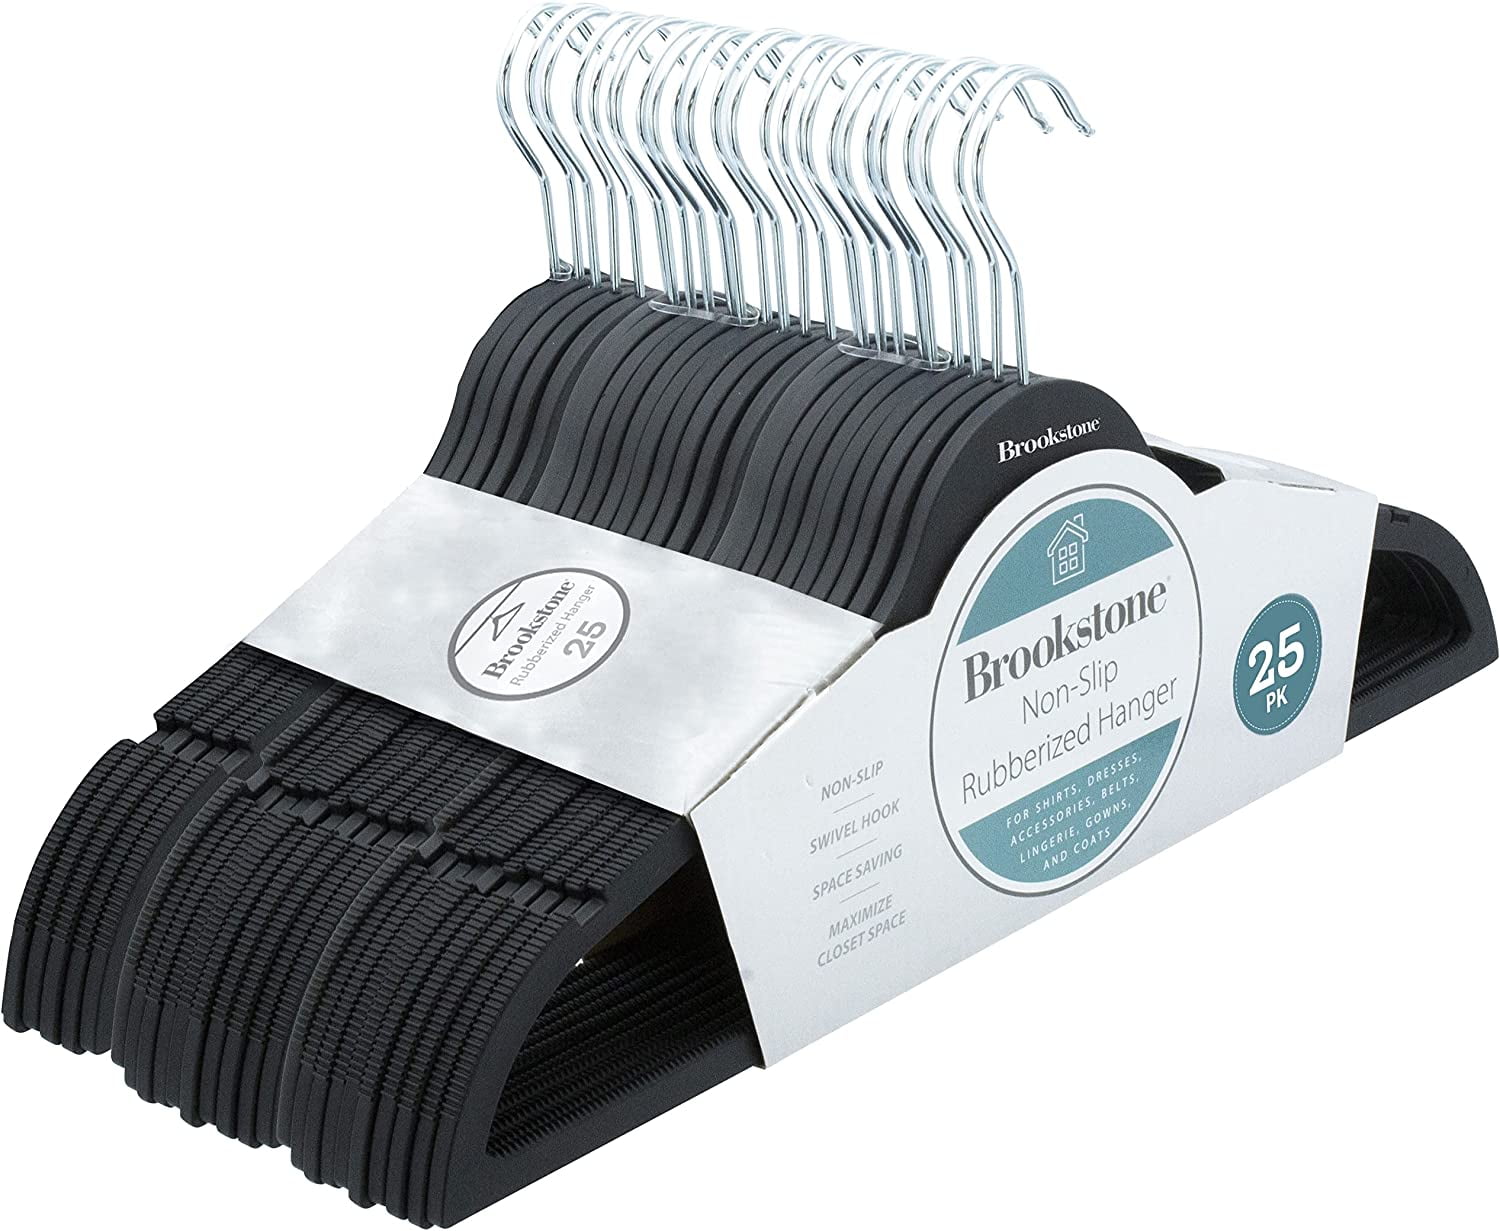 DormCo Jumbo Thick Black Hangers (Made in The Usa) 9 Pack